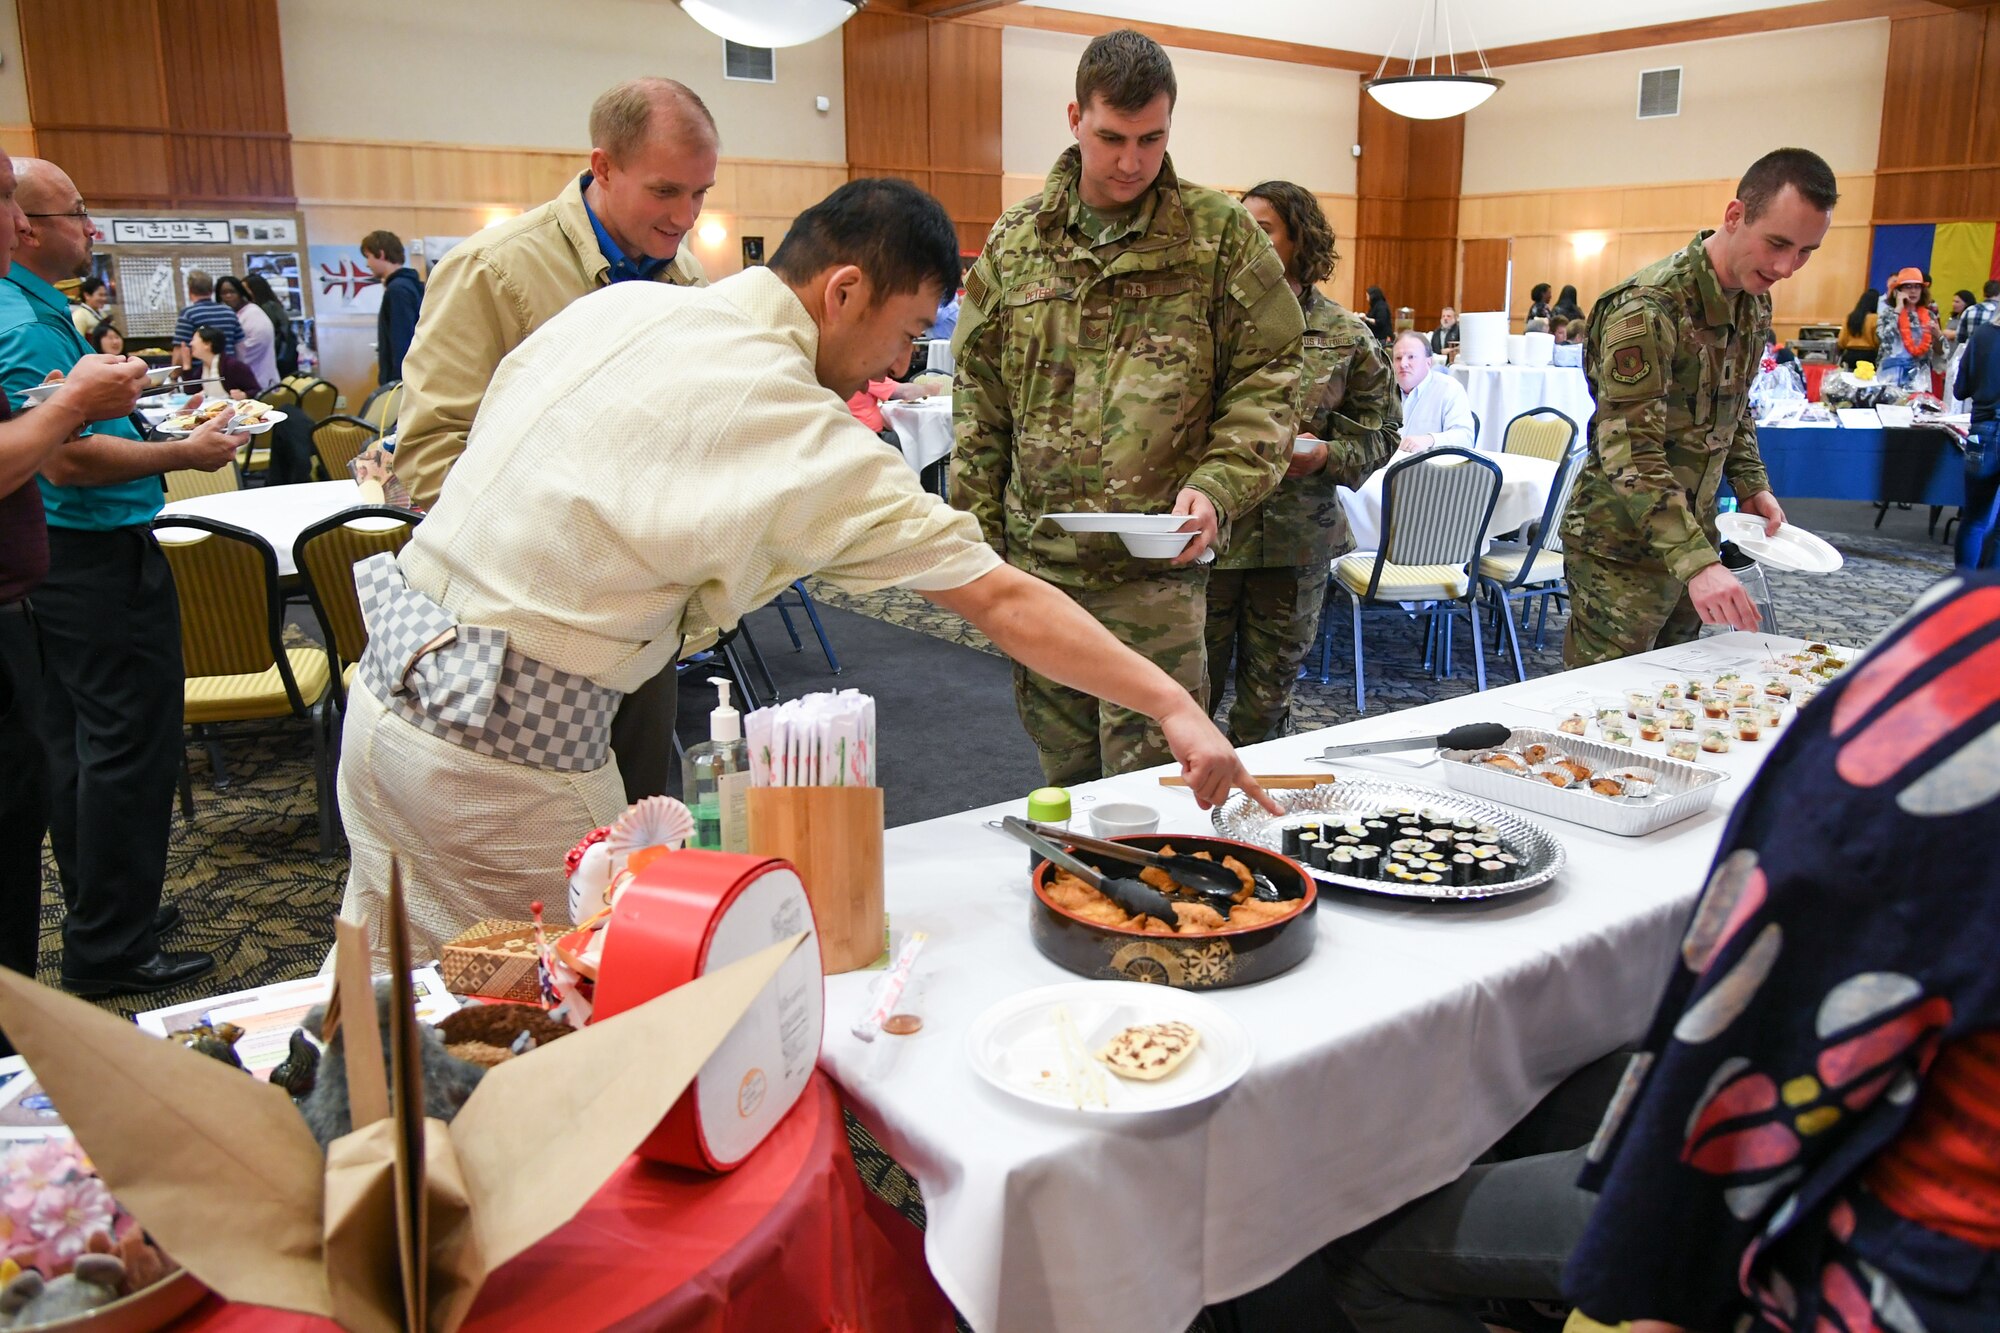 Shintaro Koya, Japan foreign liaison officer, discusses sushi with attendees at the International Culinary Tasting Buffet March 4, 2020, at Hill Air Force Base, Utah. The event was hosted by the Hill AFB foreign liaison officers and featured food, drinks, and cultural education from 15 different countries. (U.S. Air Force photo by Cynthia Griggs)